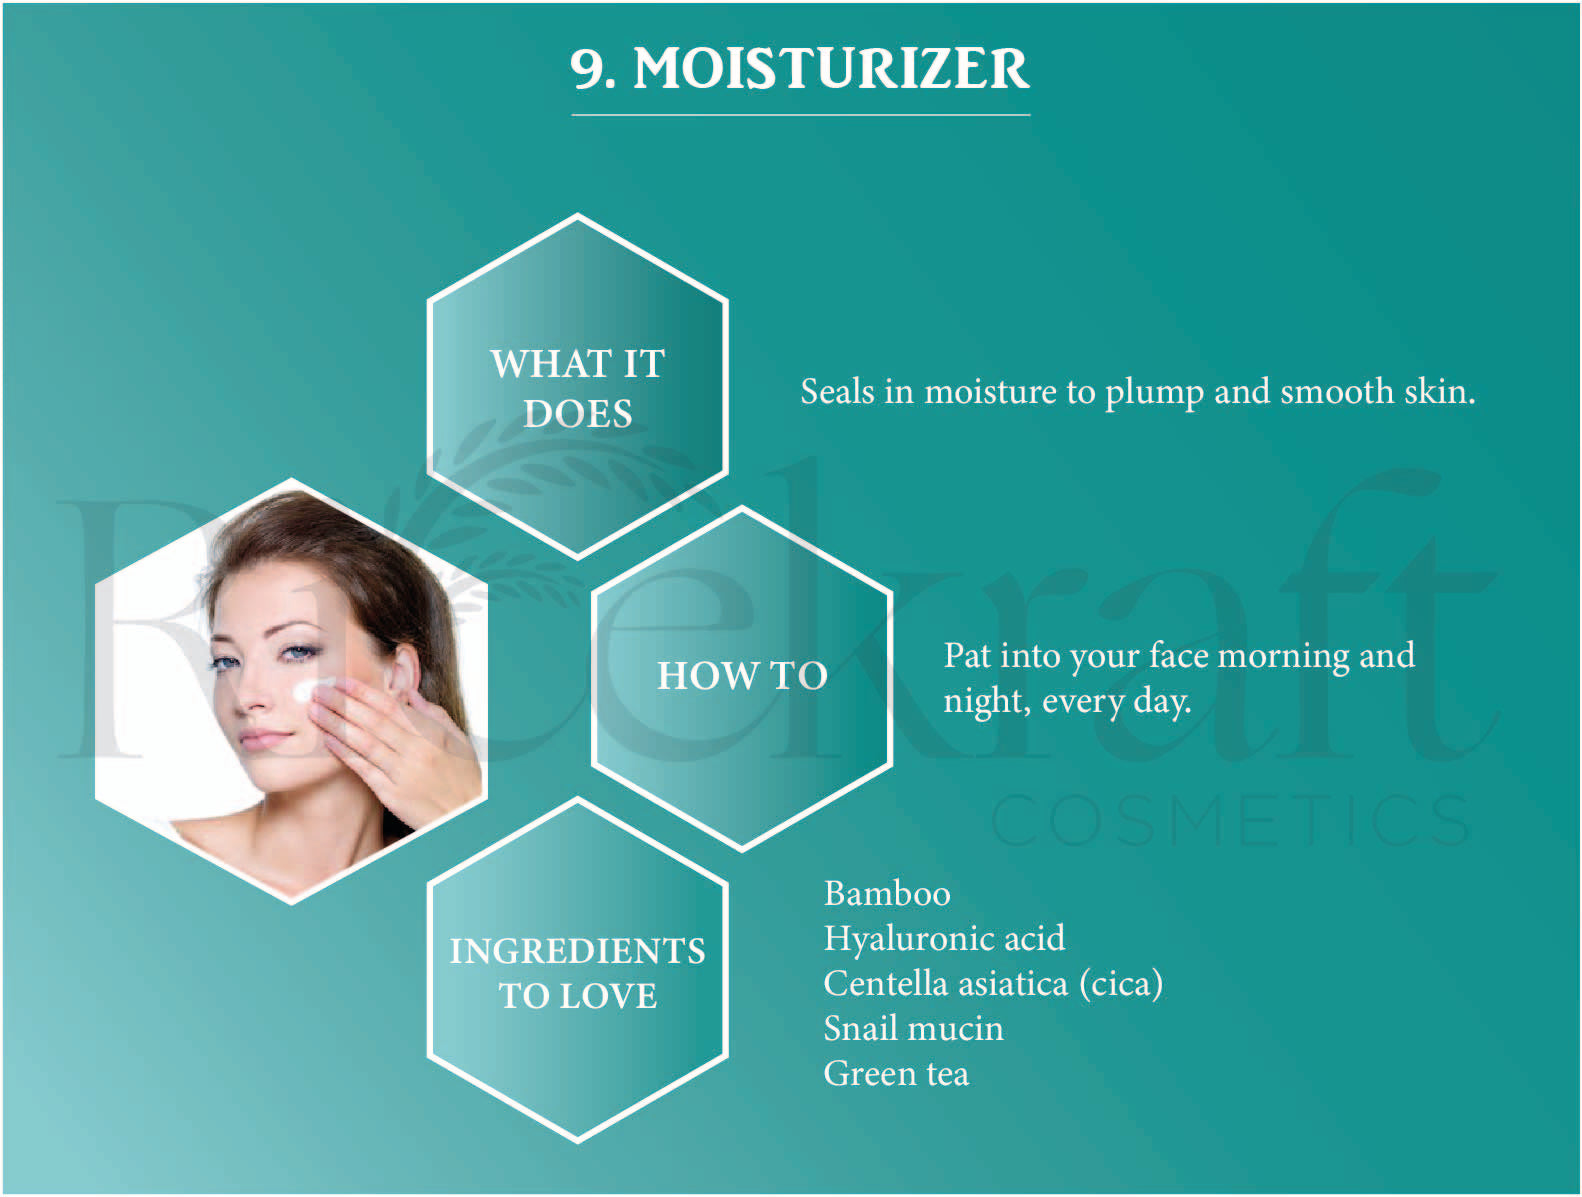 "Moisturizer: Seals in moisture, smooths skin. Apply daily, morning & night. Key ingredients: Bamboo, Hyaluronic acid, Cica, Snail mucin, Green tea."